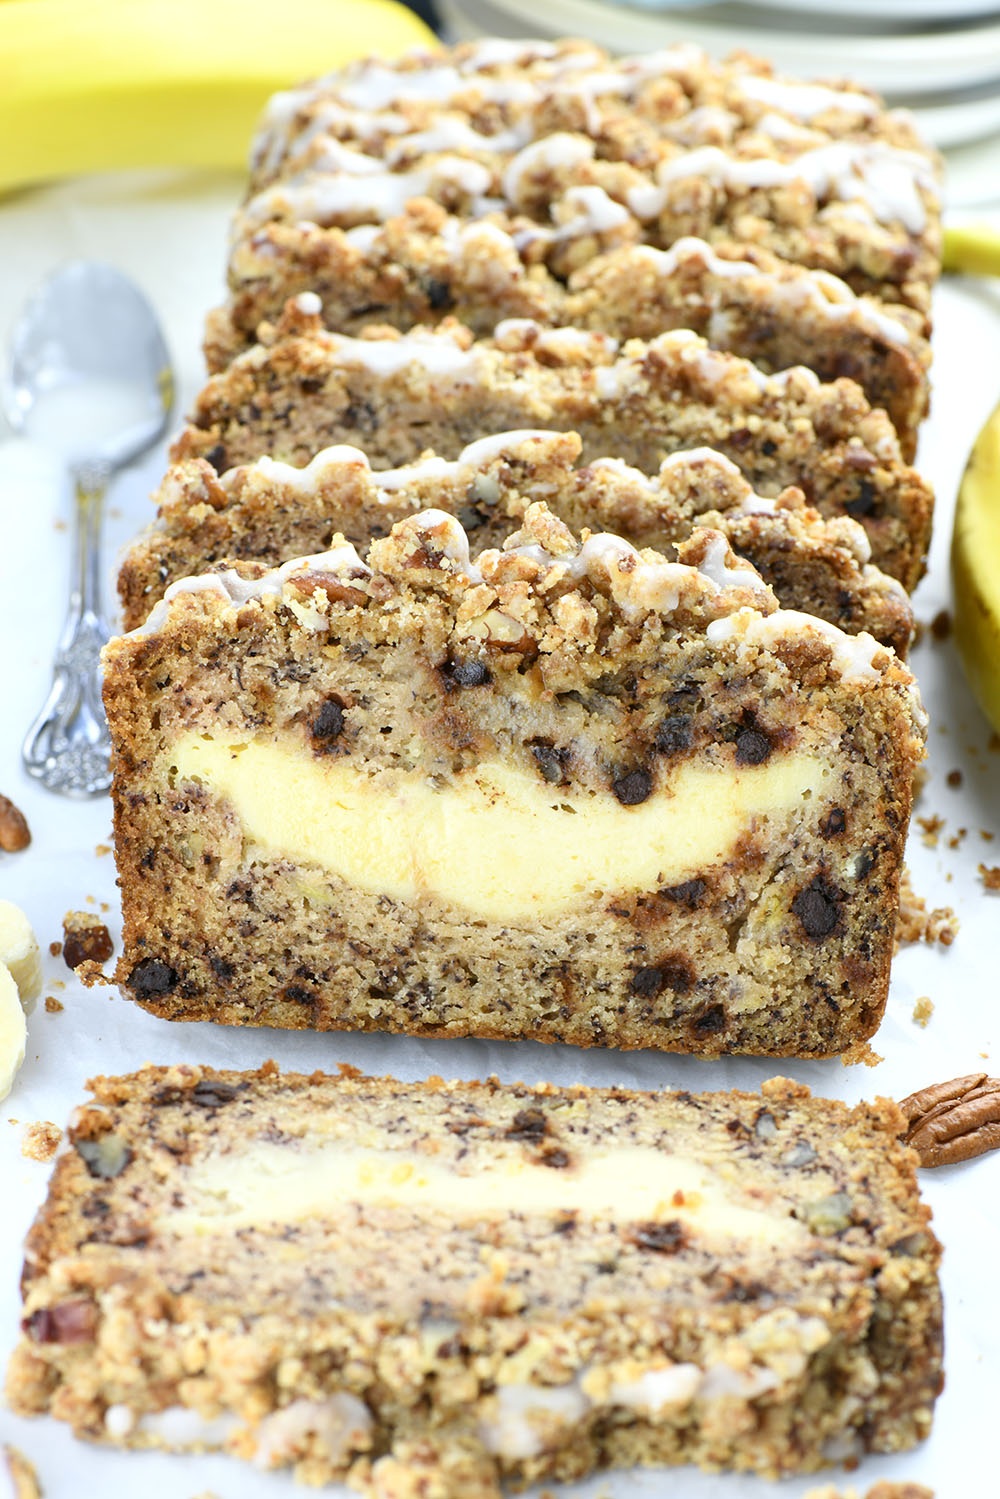 This banana bread stuffed with cream cheese filling, chocolate chips, and pecans with irresistible cinnamon streusel is more like delicious banana coffee cake, just baked in a loaf pan.